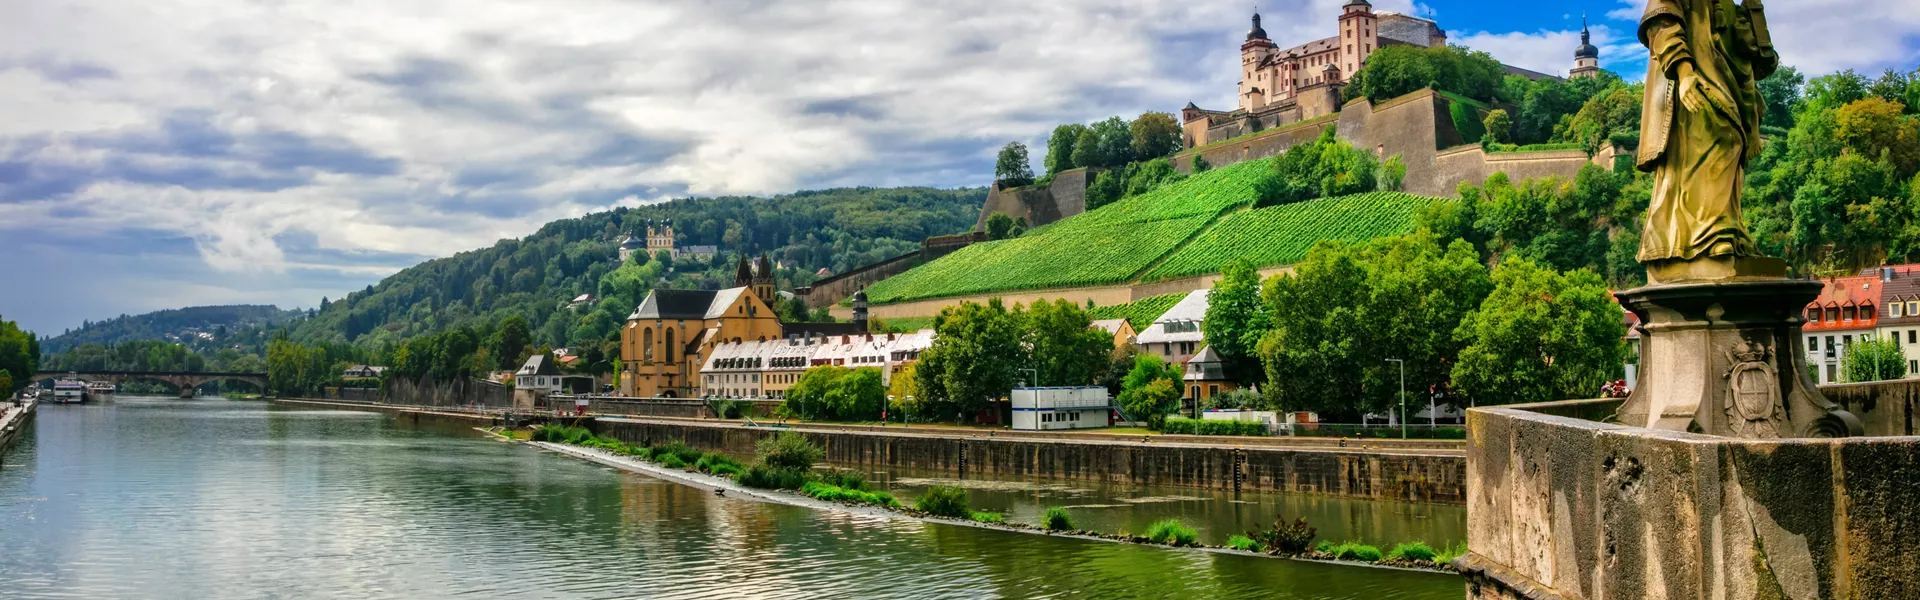 Germany Guided Tours and Travel Guide